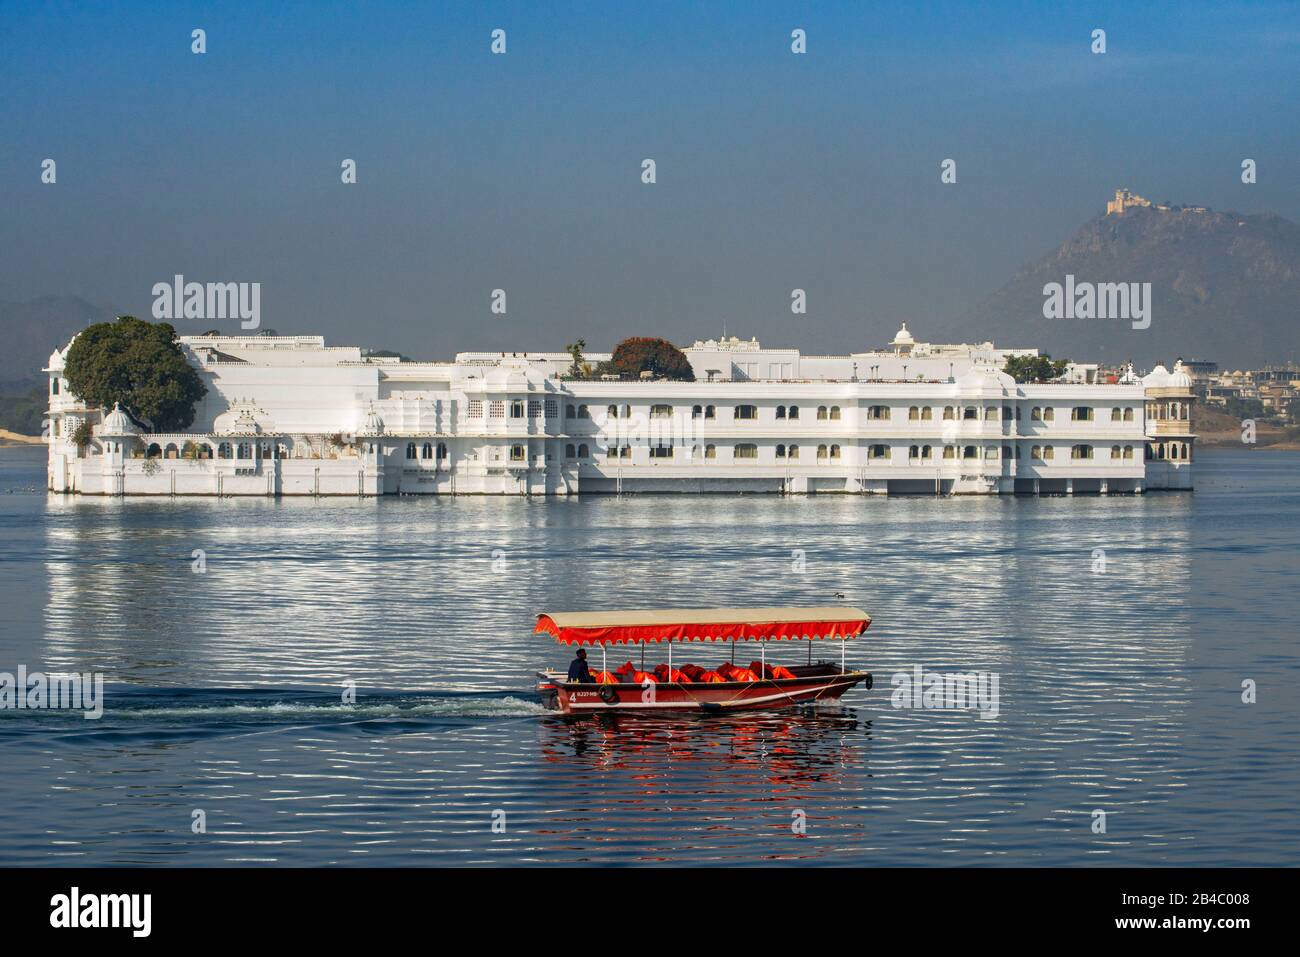 Boat crossing the Lake Palace Hotel Jag Niwas in the middle of Lake Pichola Udaipur Rajasthan India. This is one of the excursion of the Luxury train Stock Photo